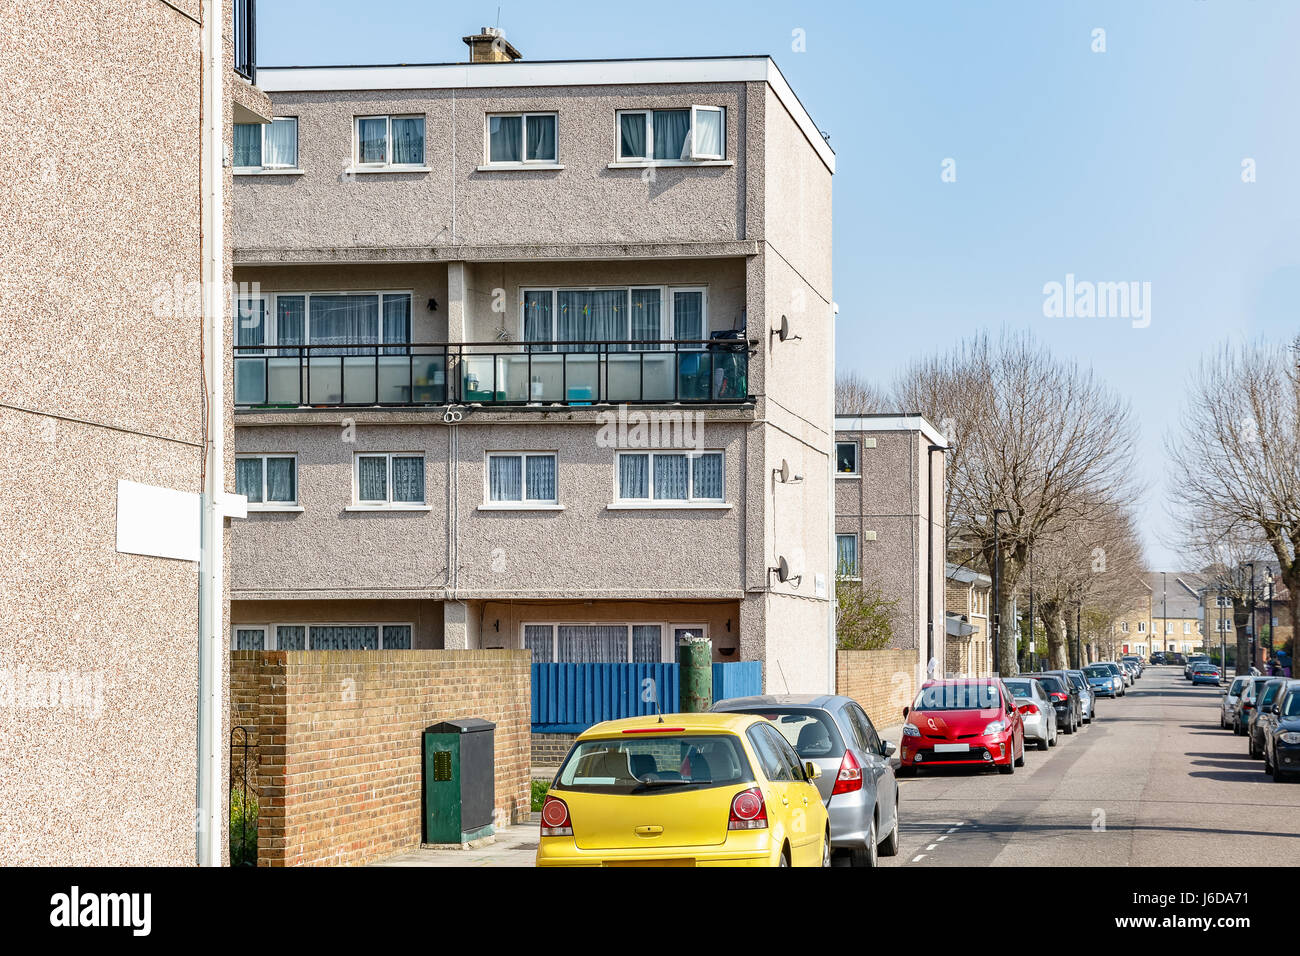 Row of council housing flats in East London Stock Photo